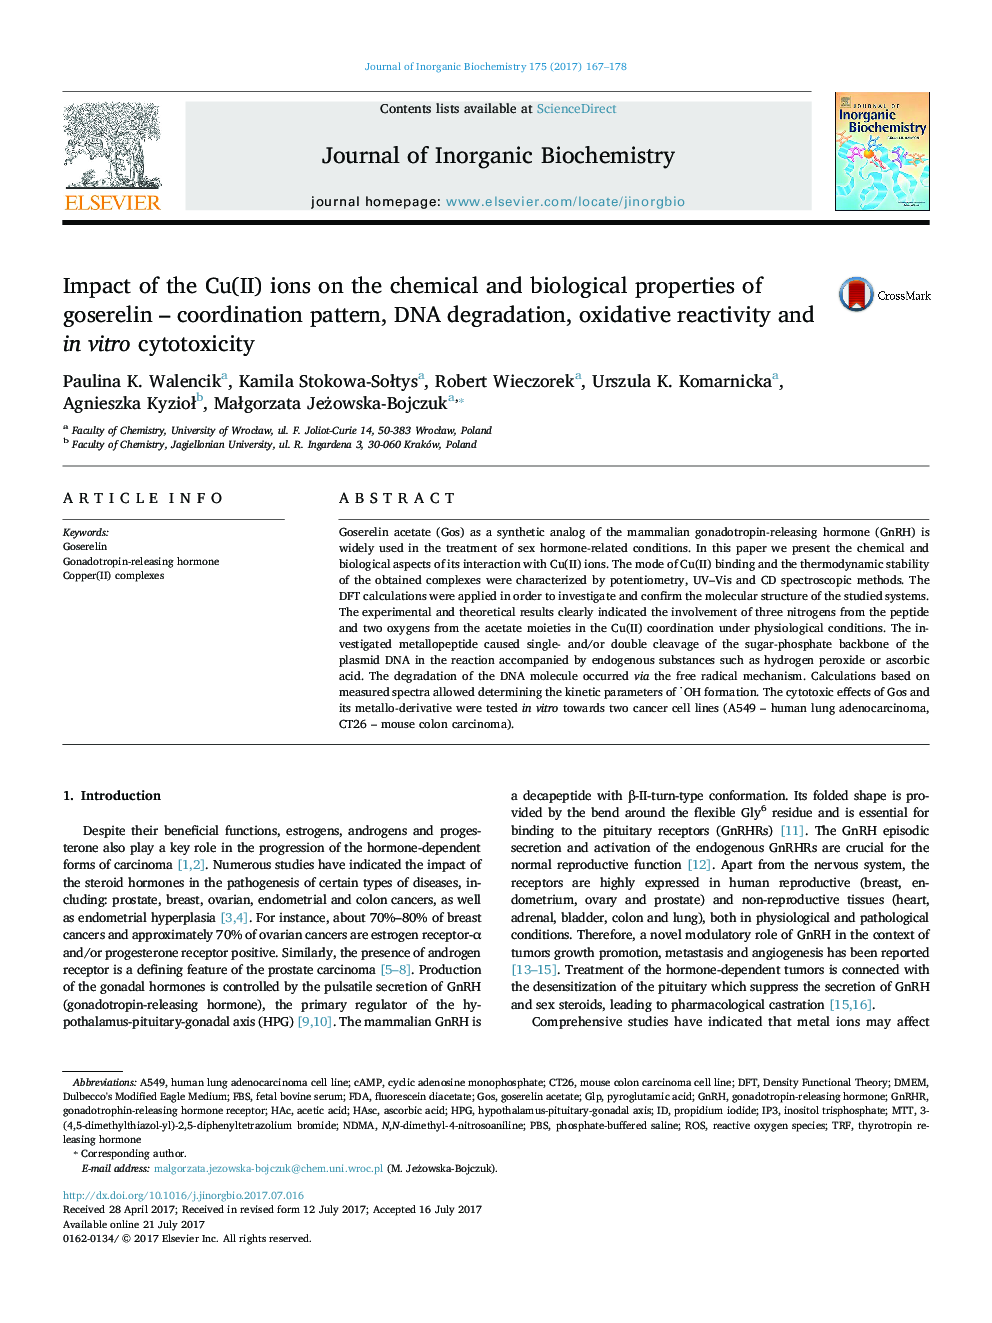 Impact of the Cu(II) ions on the chemical and biological properties of goserelin - coordination pattern, DNA degradation, oxidative reactivity and in vitro cytotoxicity